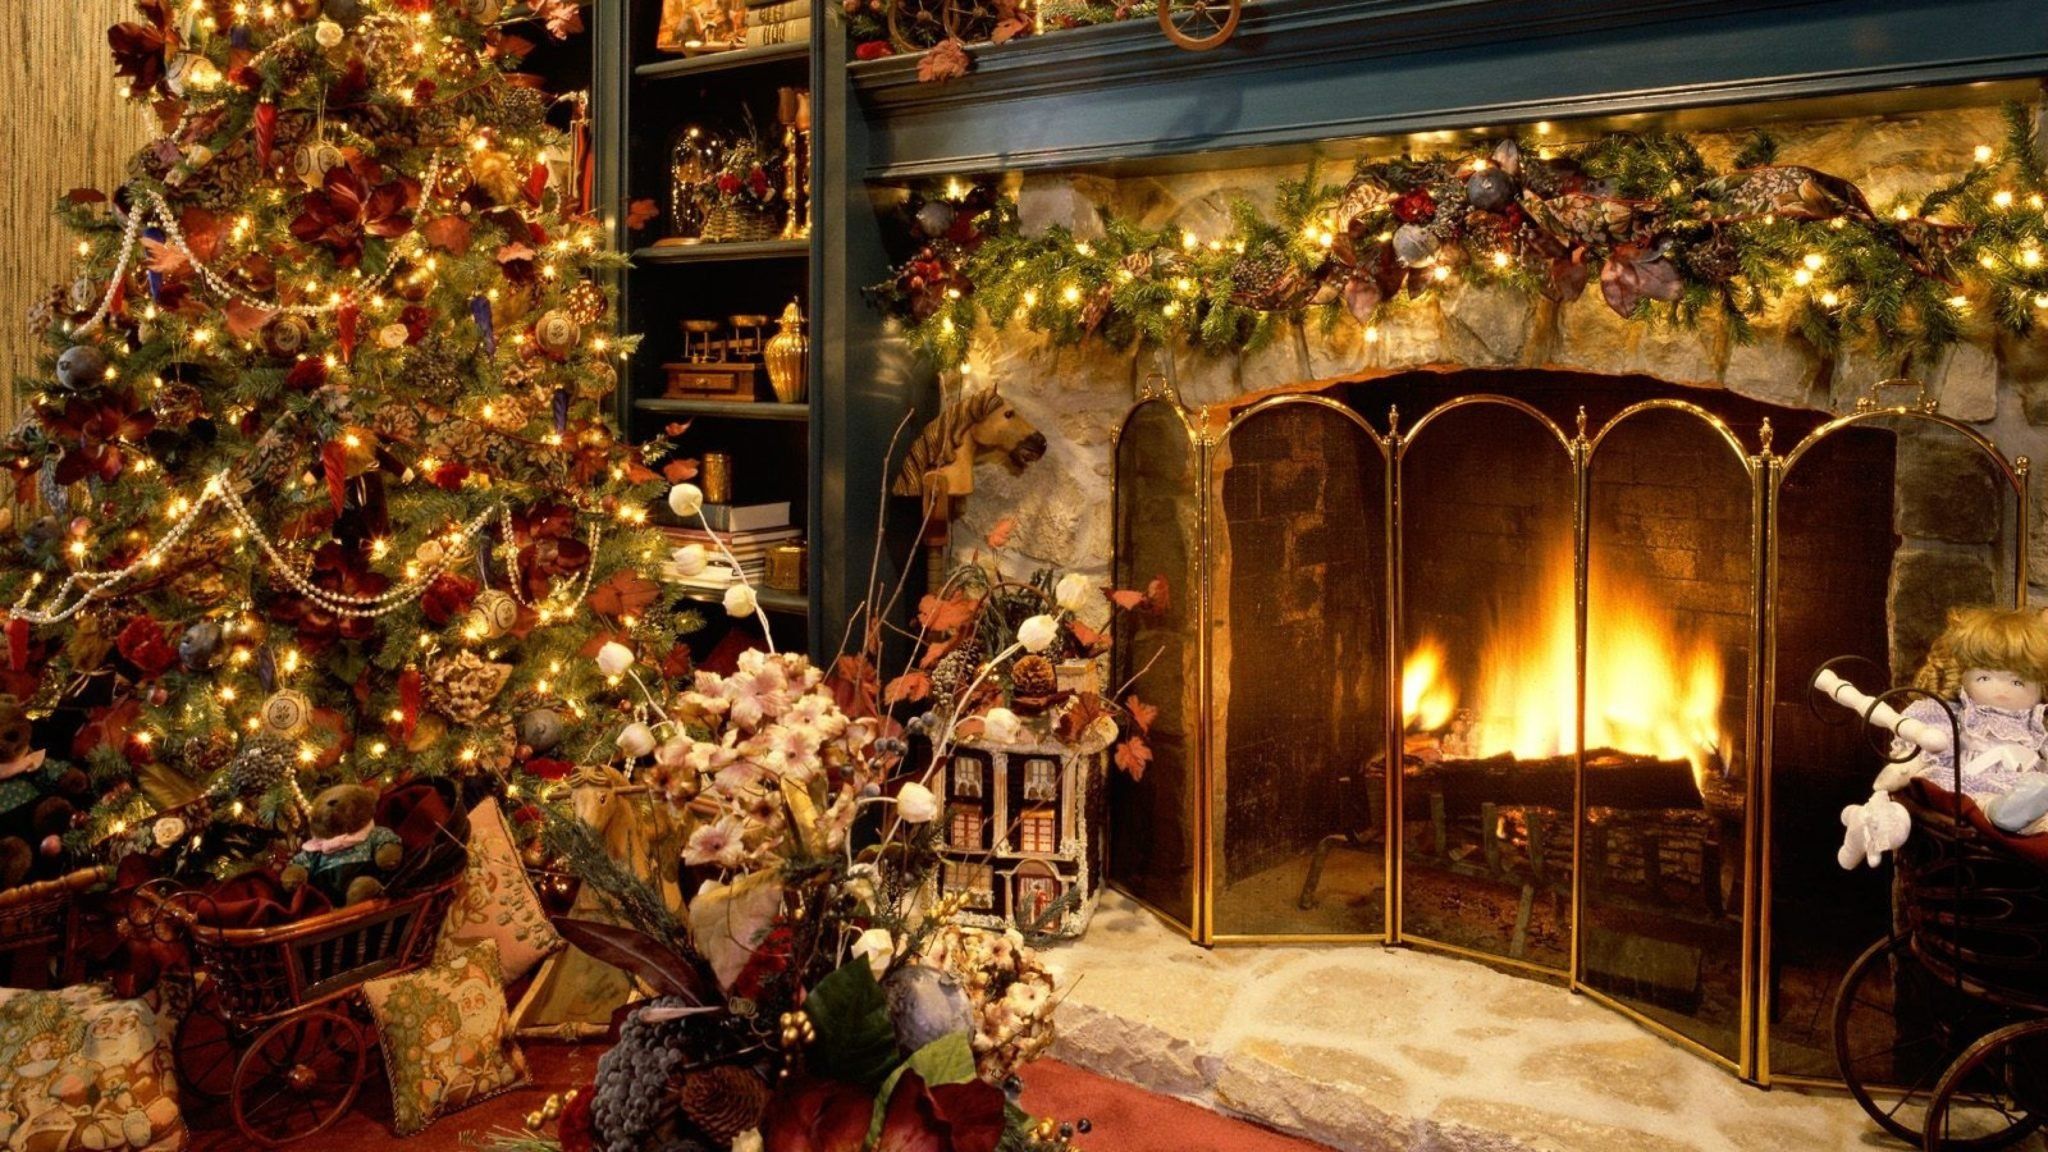 Free download Christmas Fireplace Wallpaper 2 MICHAEL WALSH QUALITY BOOKS [2048x1152] for your Desktop, Mobile & Tablet. Explore Christmas Fireplace Wallpaper. Christmas Fireplace Wallpaper, Christmas Fireplace Background, Christmas Fireplace